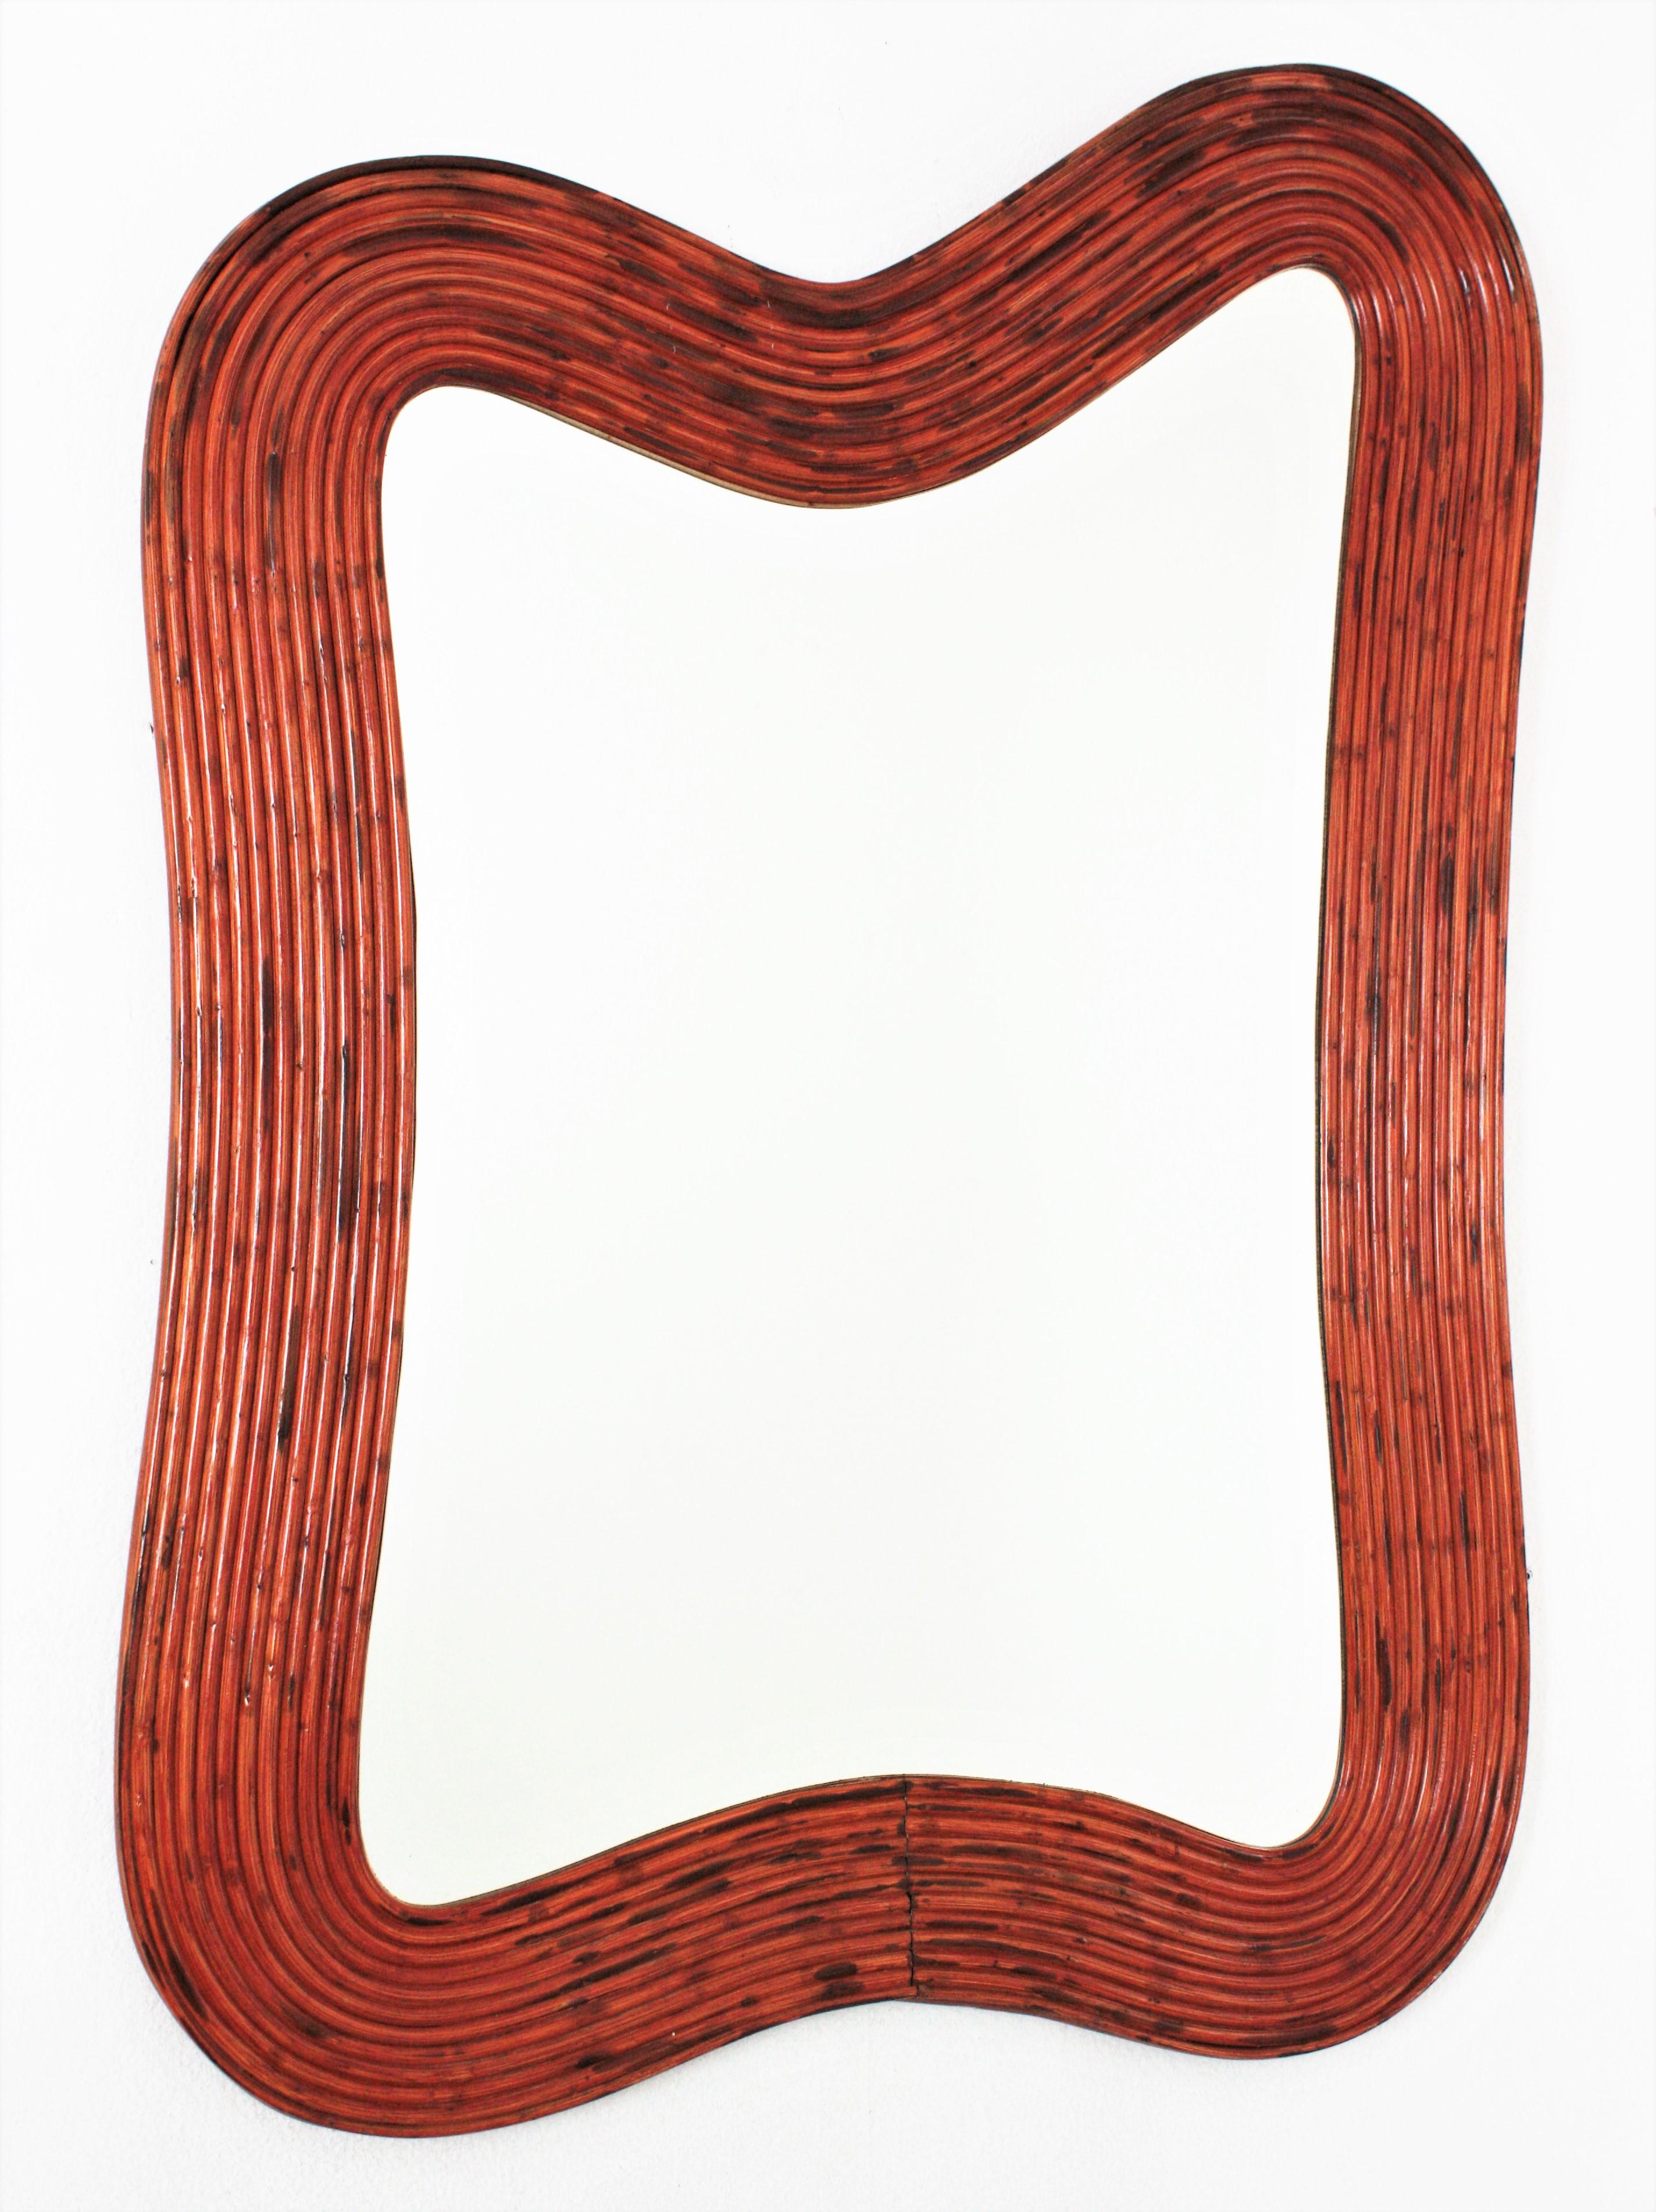 Eye-caching organic shaped moderist mirror handcrafted in rattan. Attributed to Vivai del Sud. Italy, 1960s.
This mirror features a finely executed frame with organic design made of 12 layers of rattan canes.
To be used as wall mirror on a